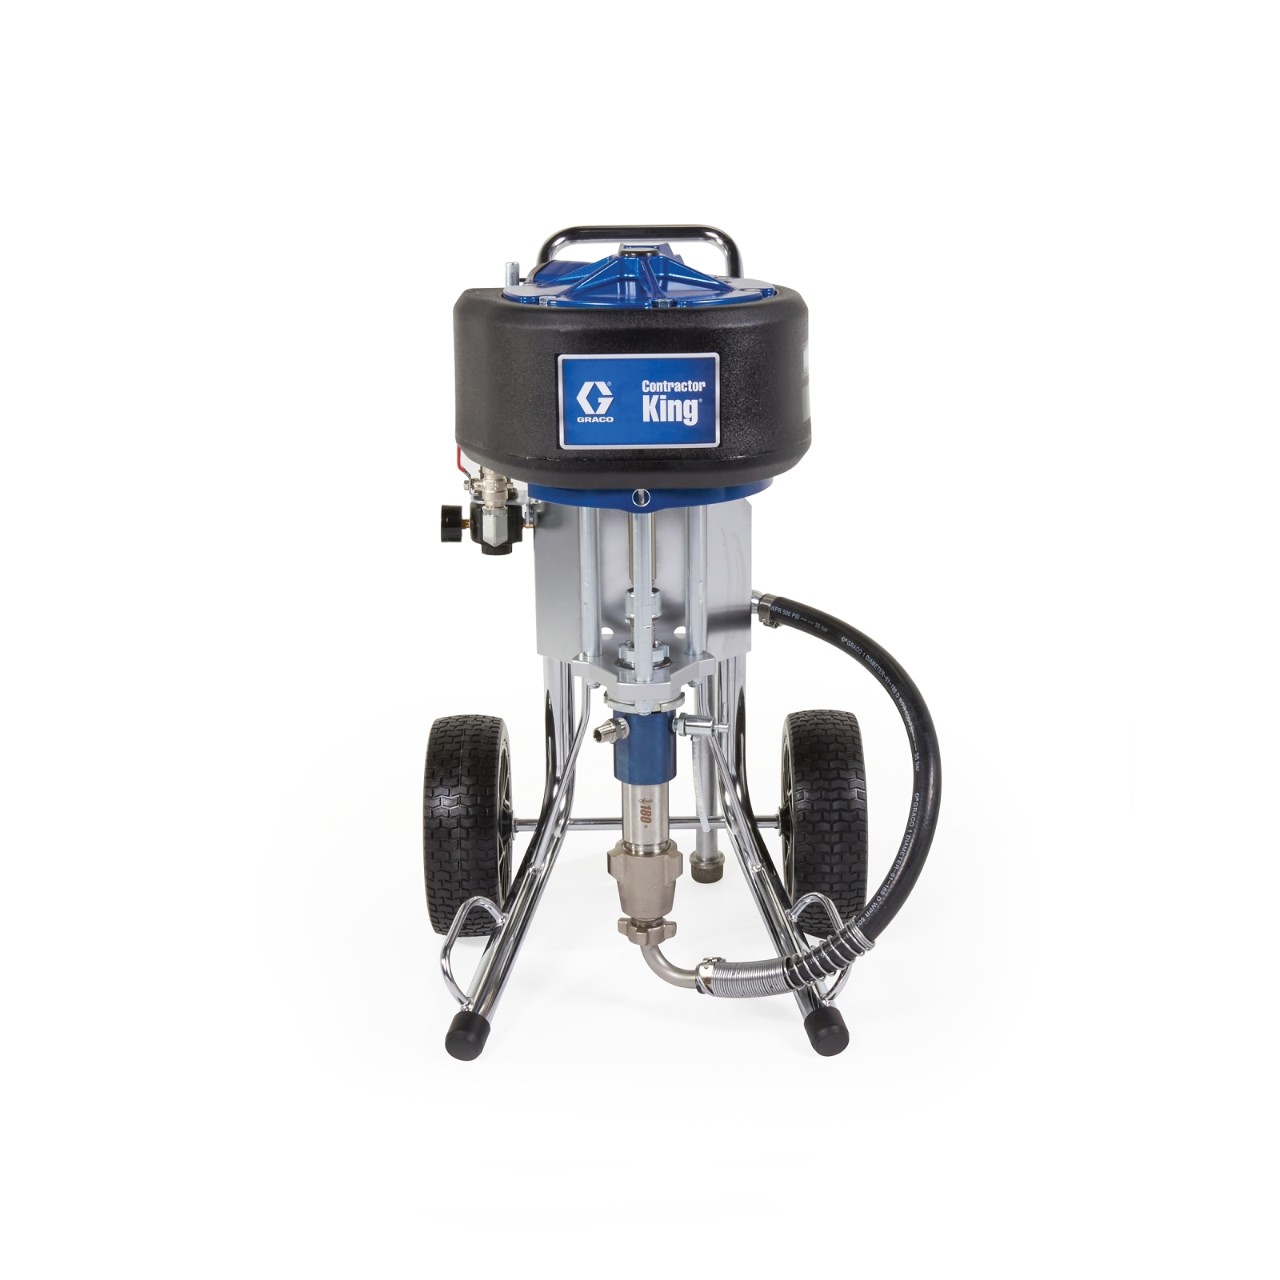 Graco Contractor King Air Powered Airless Sprayer